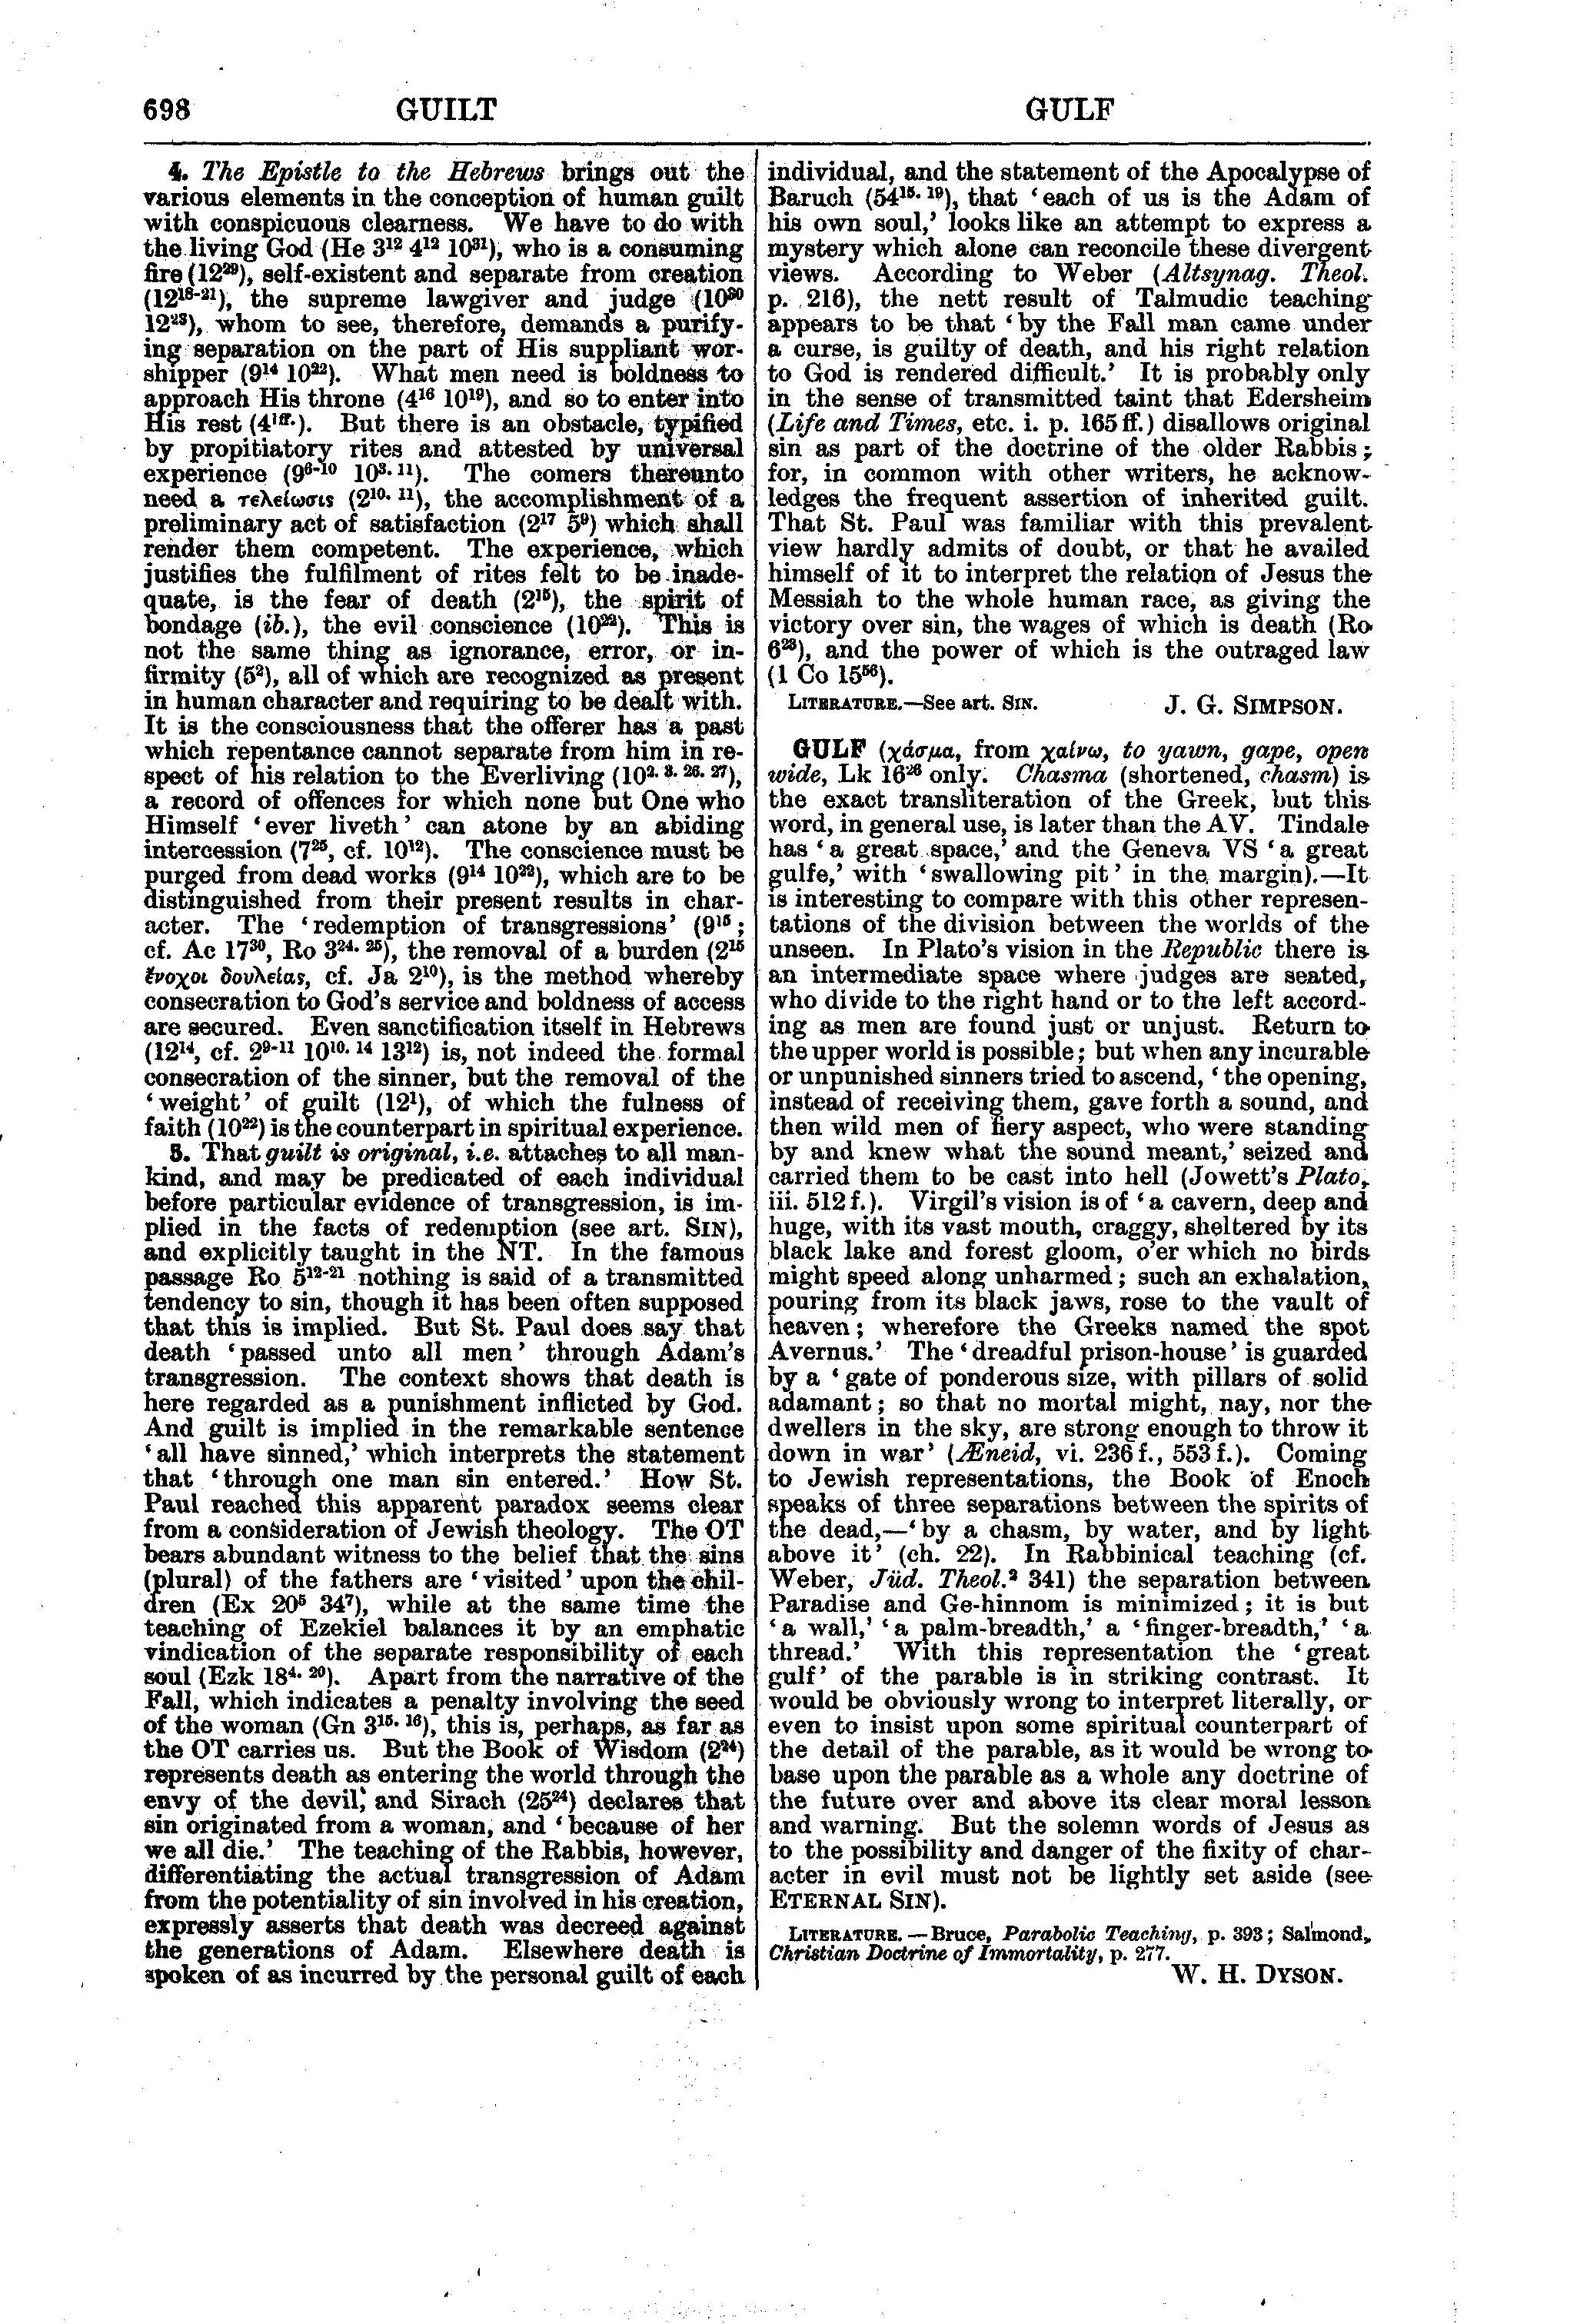 Image of page 698